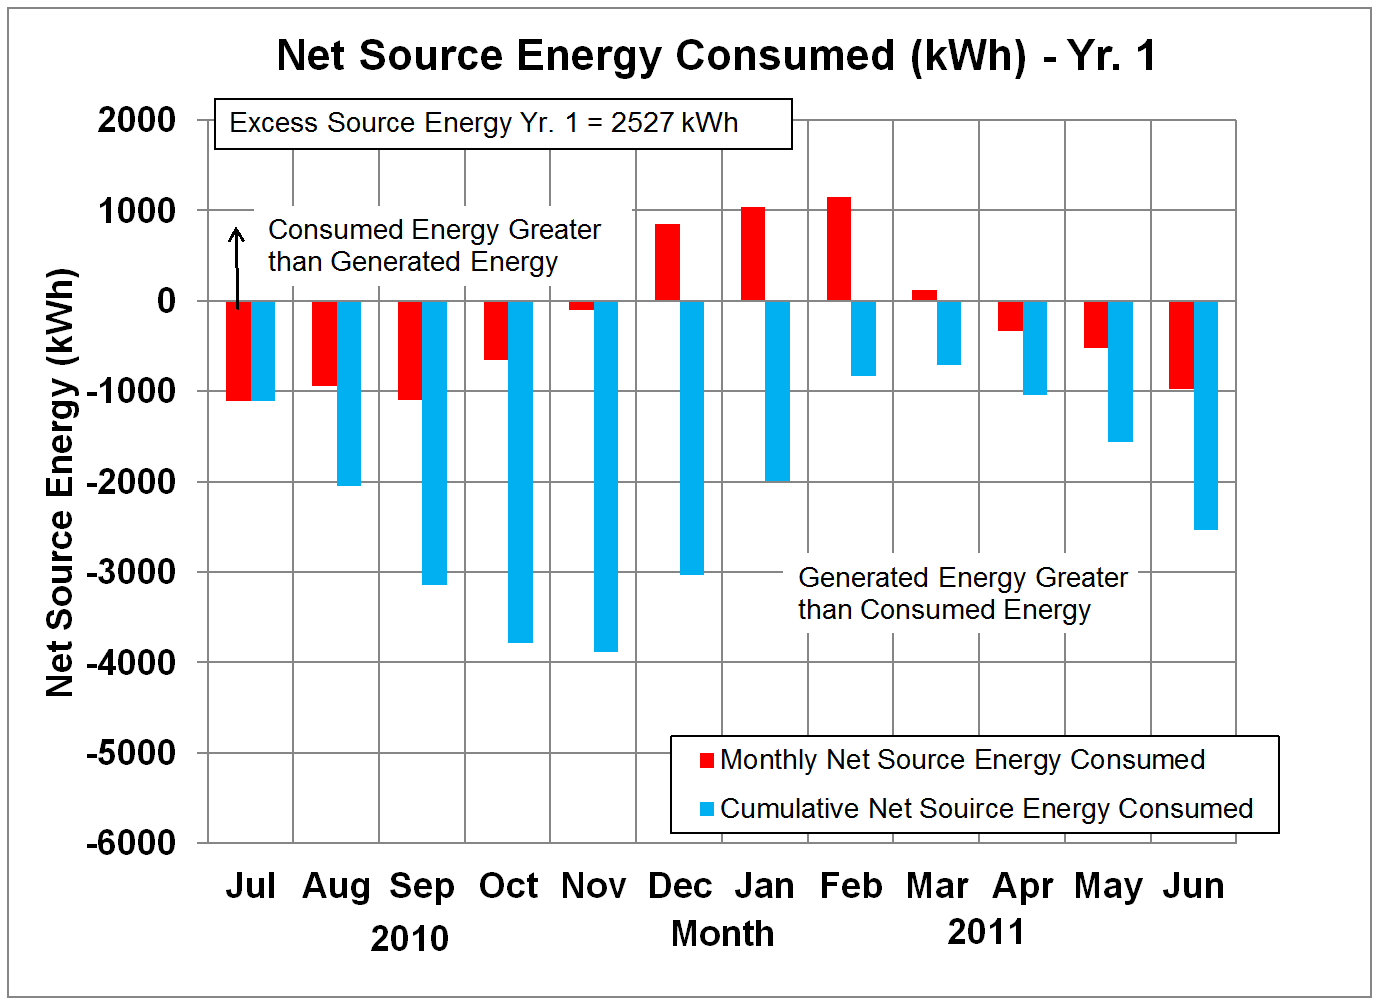 Net Source Energy in kWh - Yr. 1